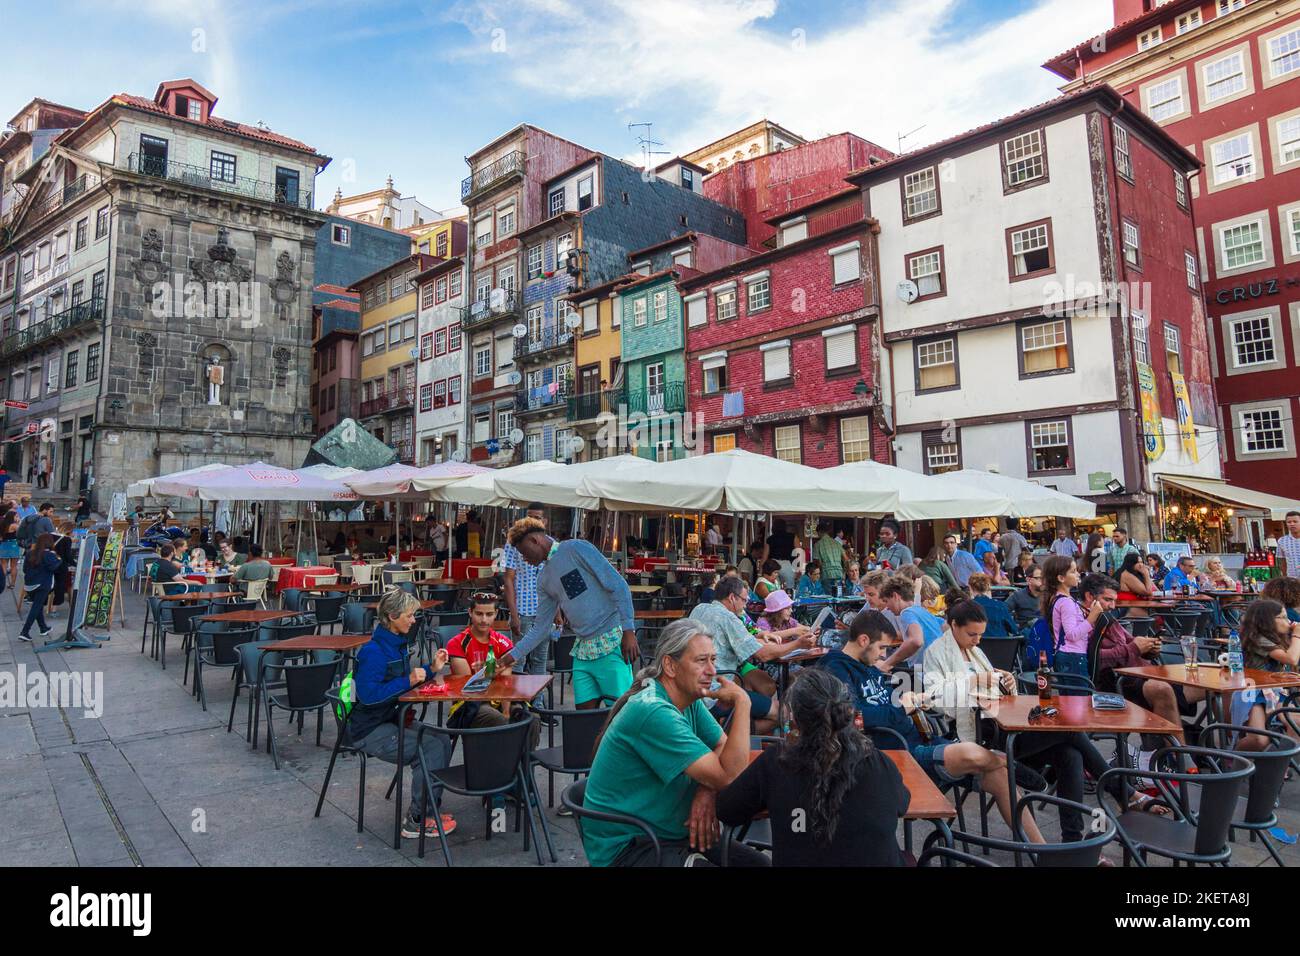 Porto, Portugal - July 26th, 2018 : People sit at an outdoors cafe in the Unesco World Heritage–listed Ribeira district. Stock Photo